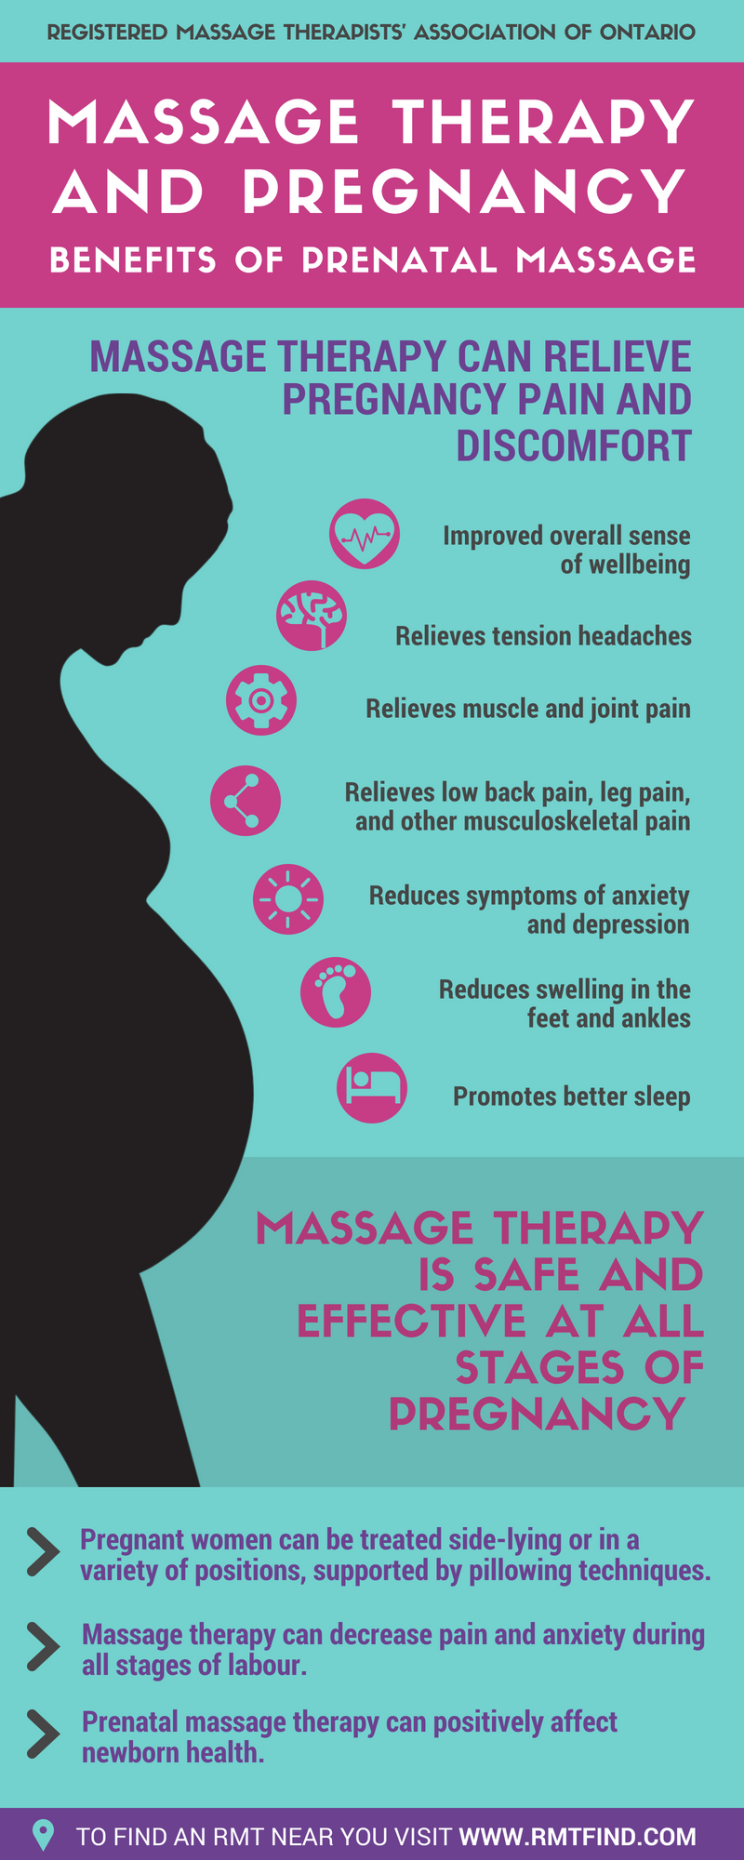 Massage Therapy for Pregnancy